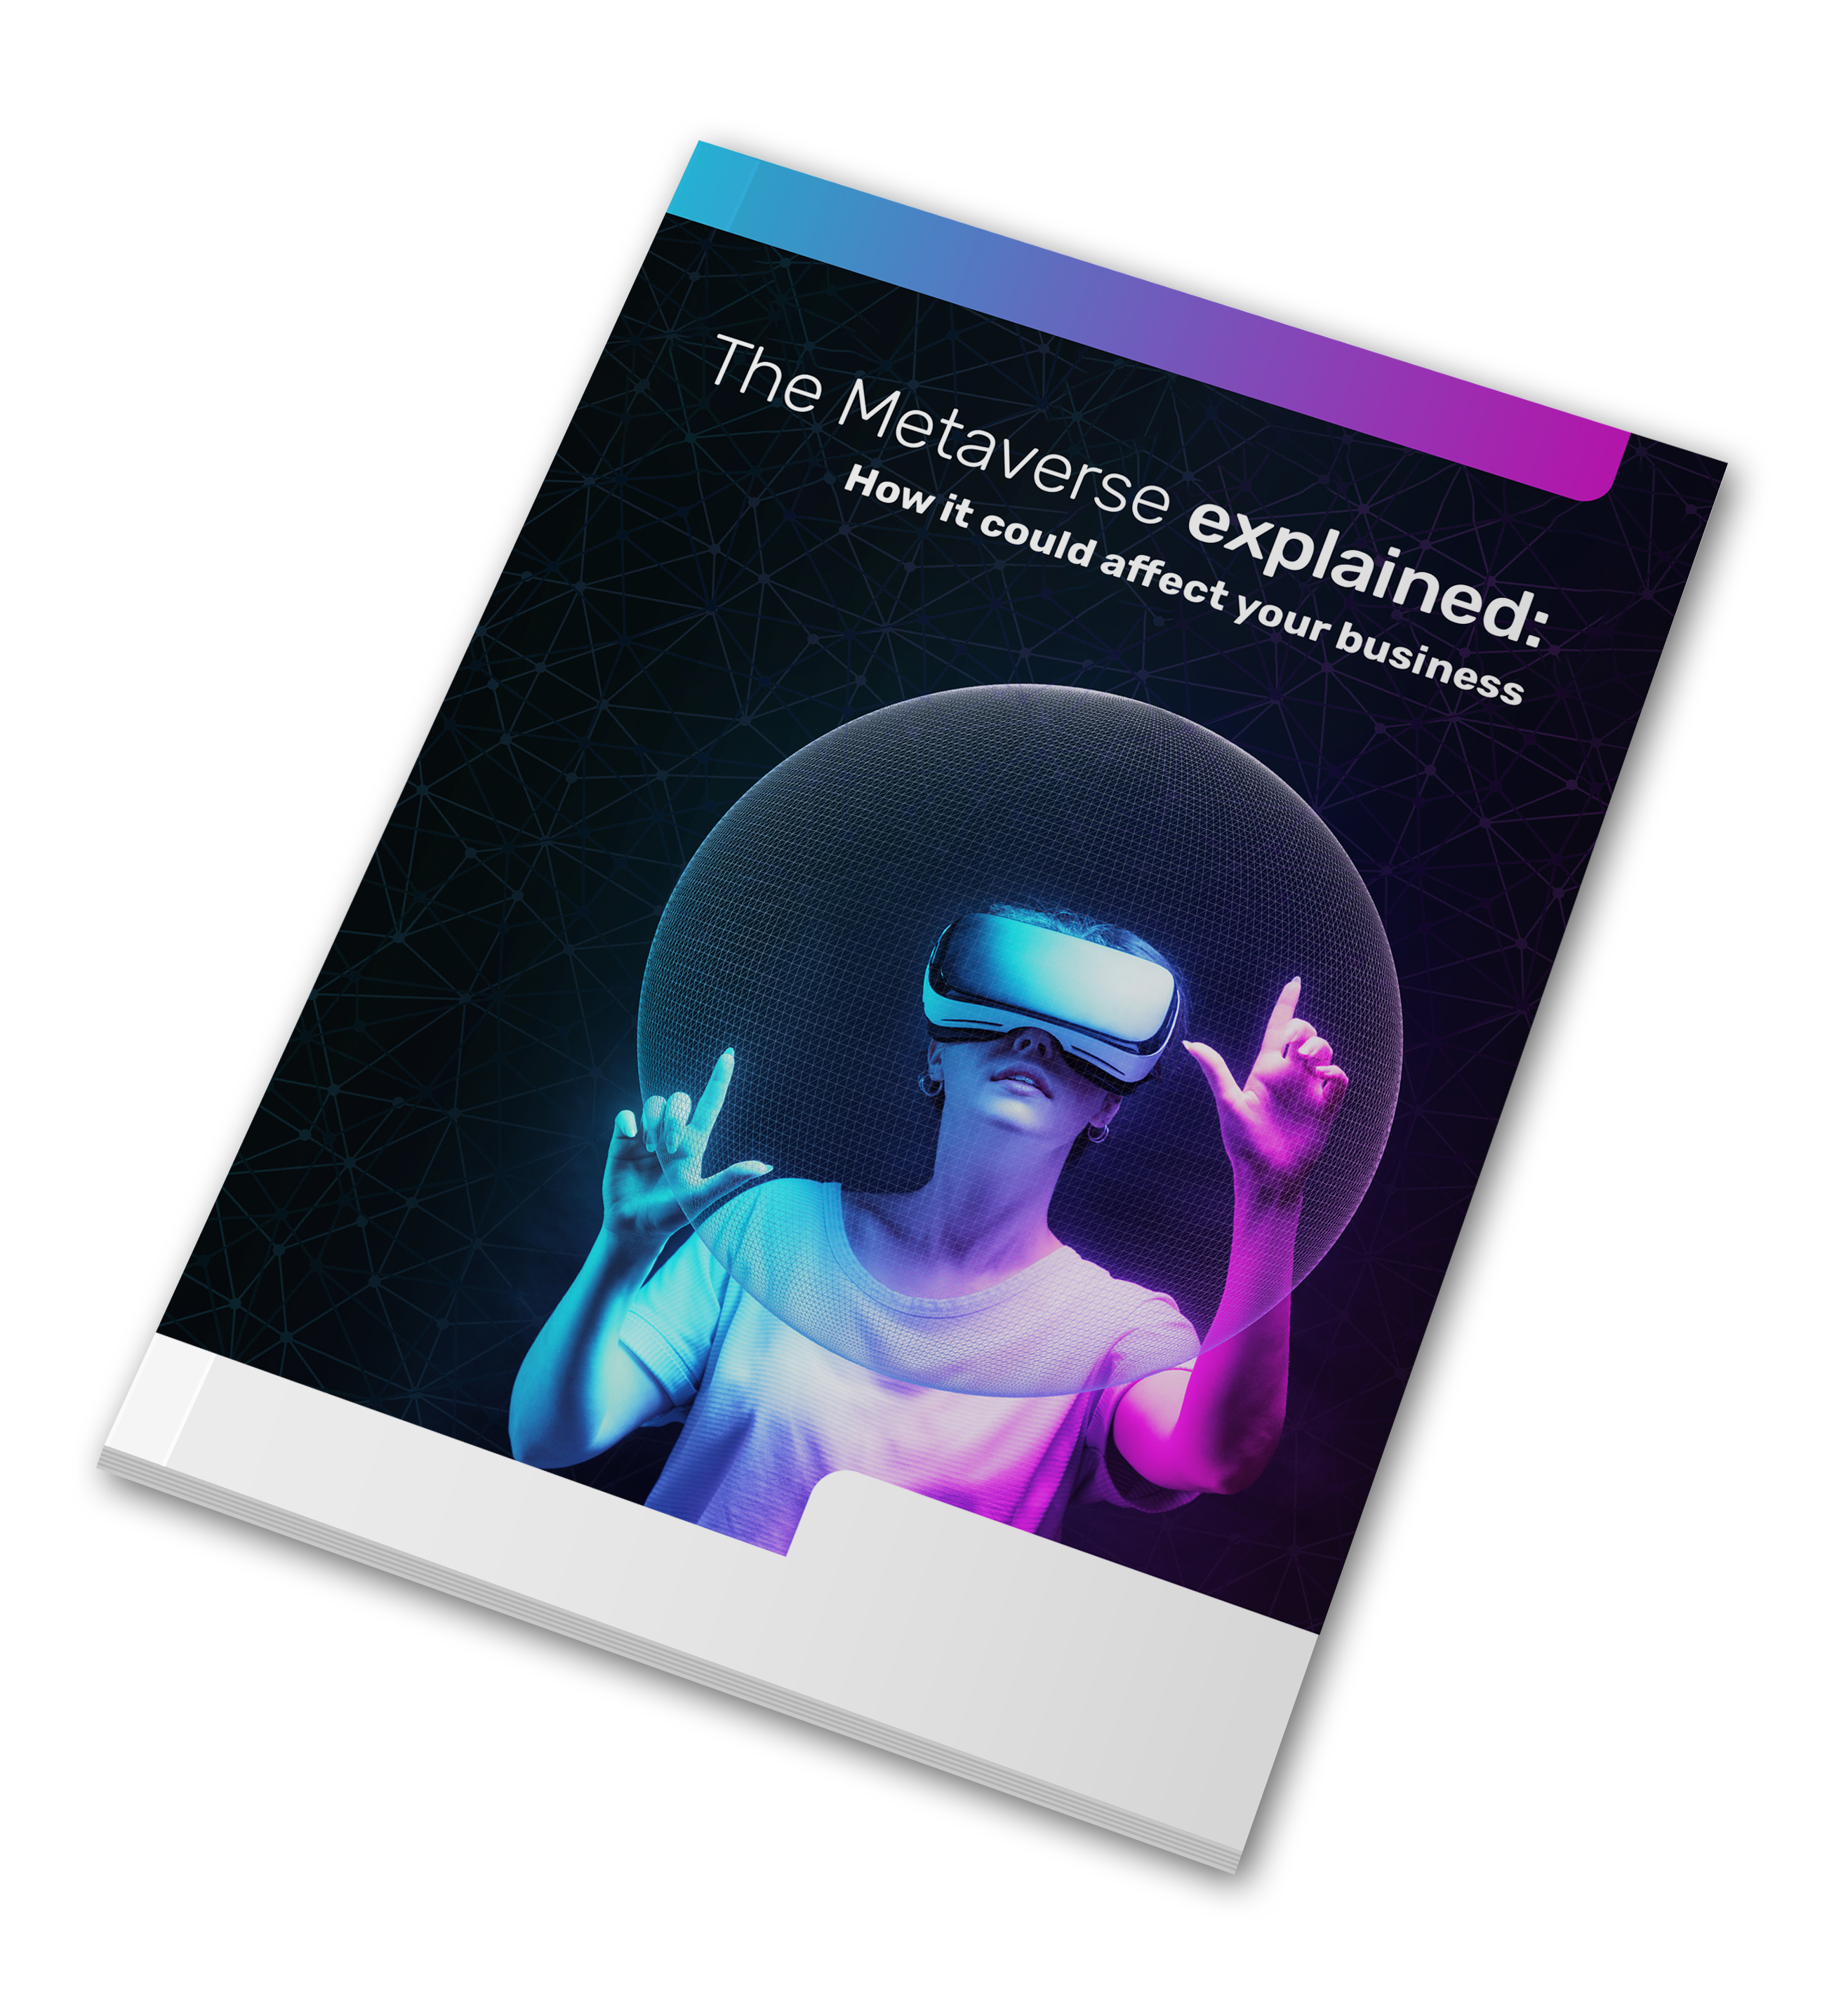 The Metaverse explained: How it could affect your business